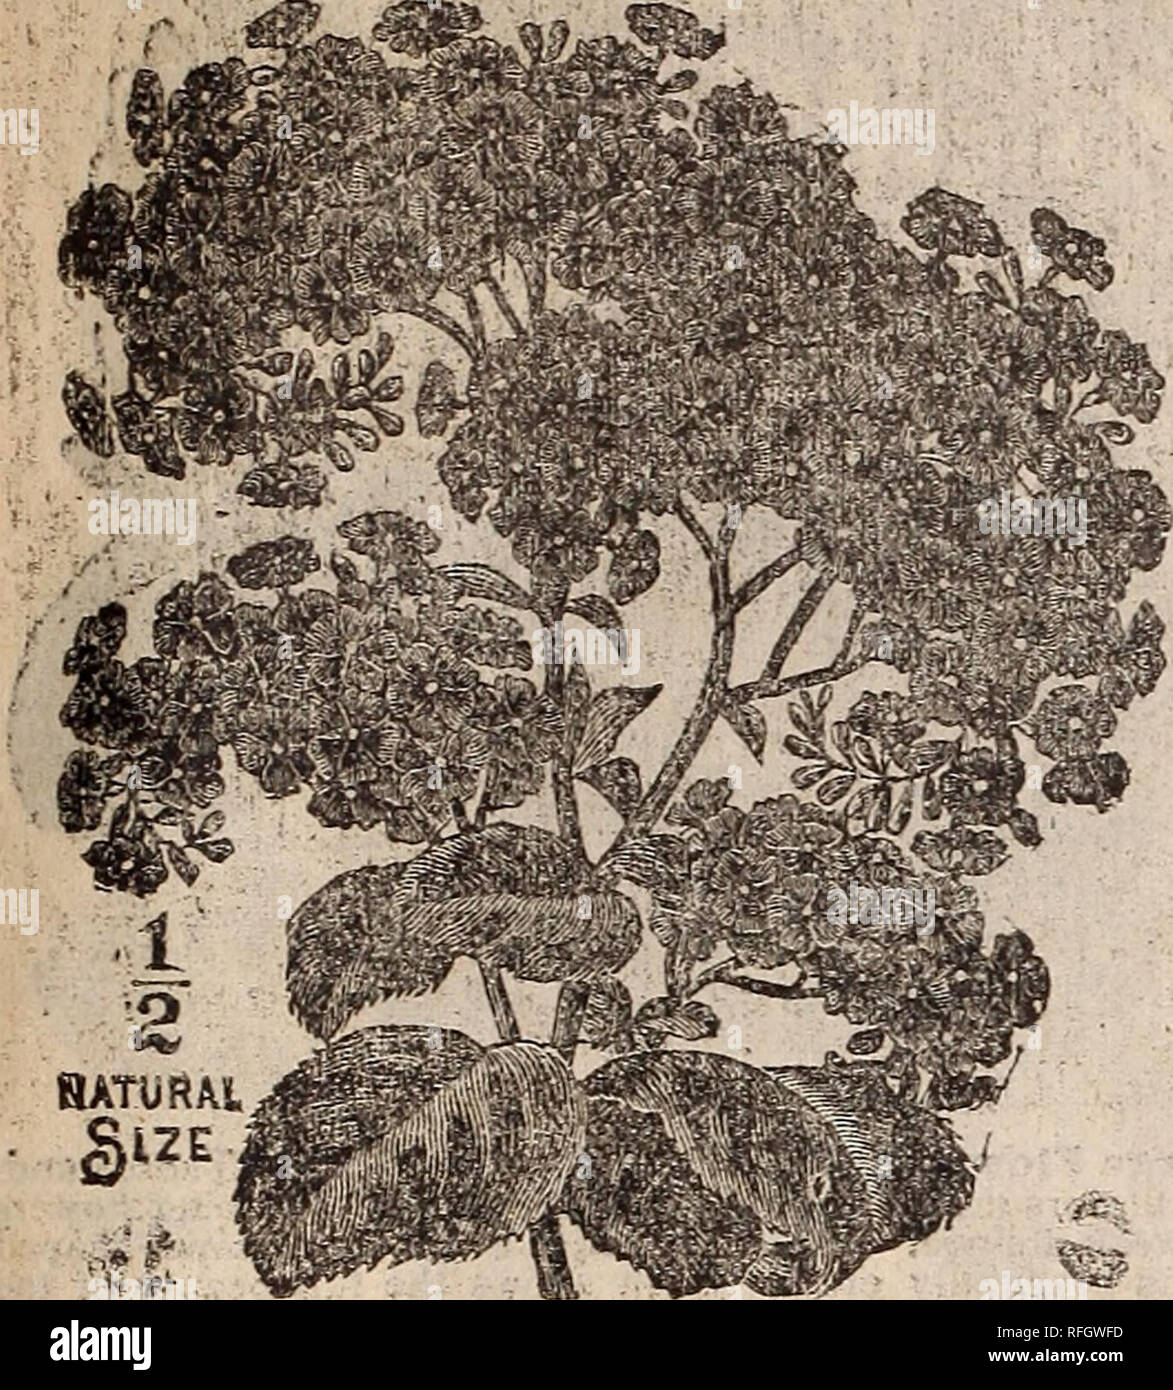 . Mills' seed catalogue : 1900. Nurseries (Horticulture) New York (State) Catalogs; Vegetables Seeds Catalogs; Plants, Ornamental Catalogs; Flowers Catalogs. ' HELIOTROPE: great iavorfieun.accoimt, of'its beautify:' fragrance. s^i3 easii'v vaisedrtrdm'ths' sSed ajid.-' if sbtvn in opea â round, wtll'produce fto'wers In Aug;, But the se&amp;d v.'ill do better if sovn in the house and set out in the opeii ground when thcweather 15 warra.- nOON FLOWERS. II. This is a -^Nfell-known shrub-like plant, producing ciusters of verbena-like flowers, in pink', yellovv, orange I-enioin'e's. Giant HybridâA Stock Photo